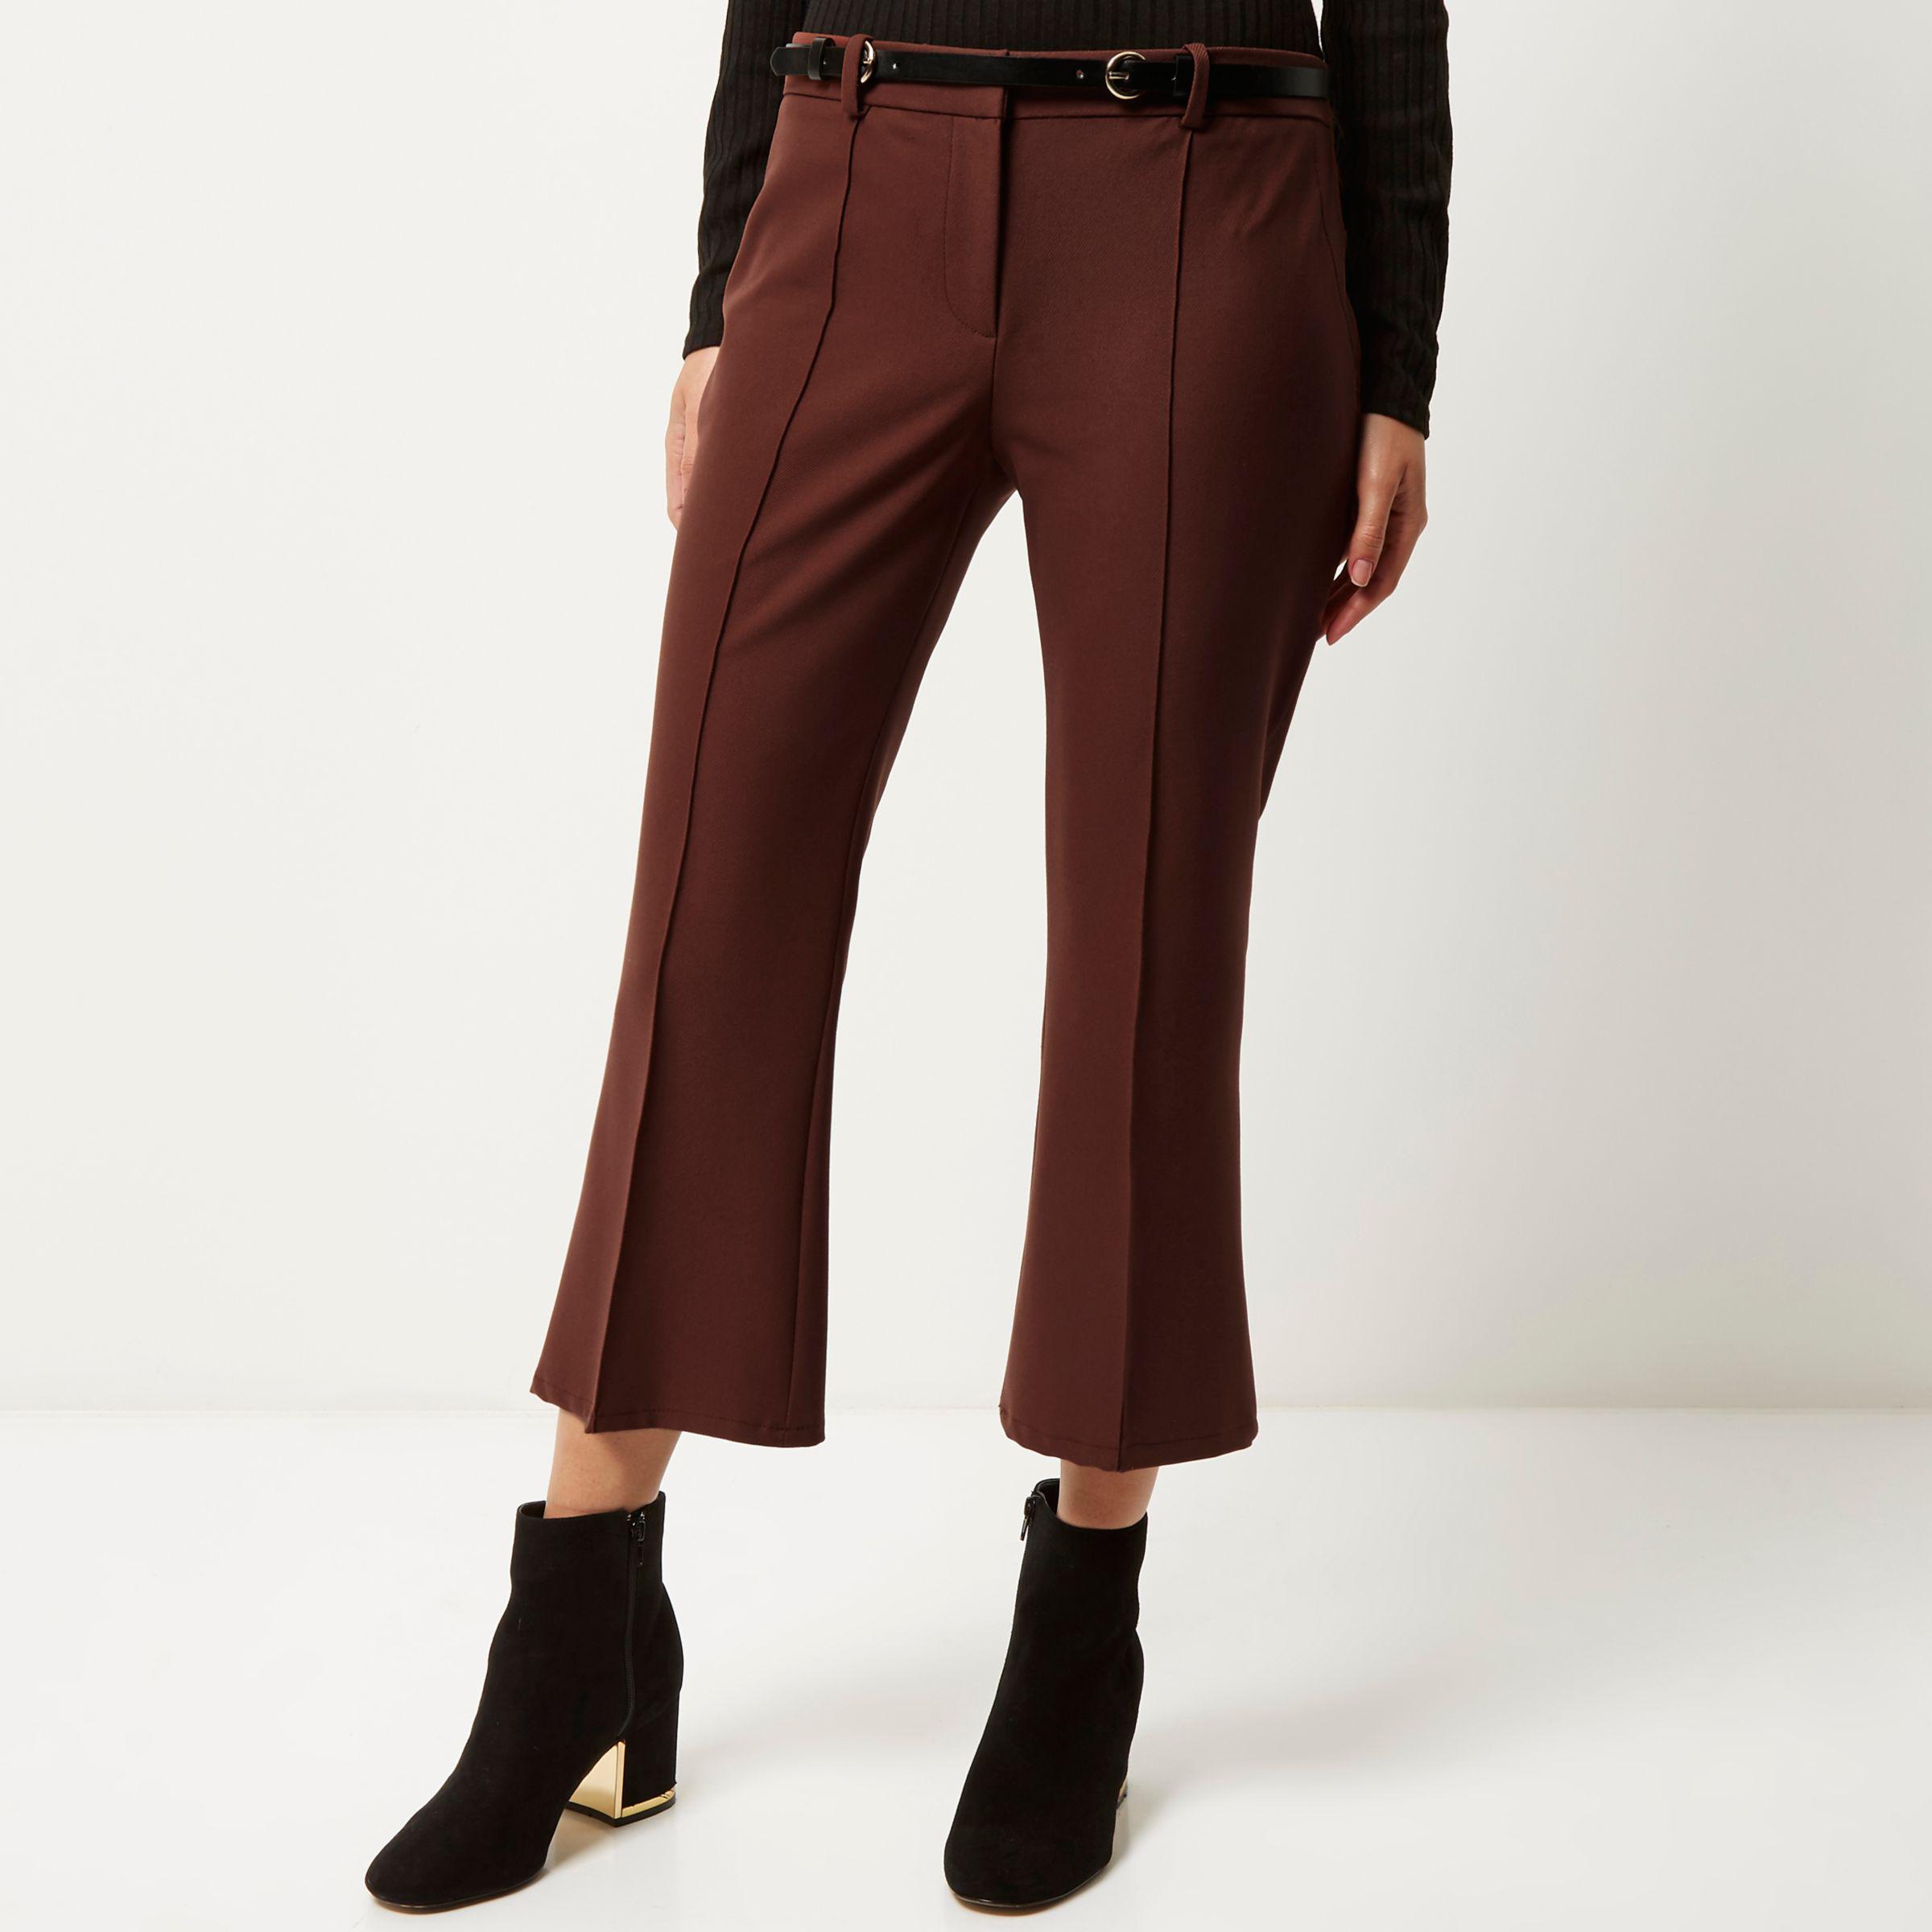 Lyst - River Island Brown Cropped Kick Flare Trousers in Brown